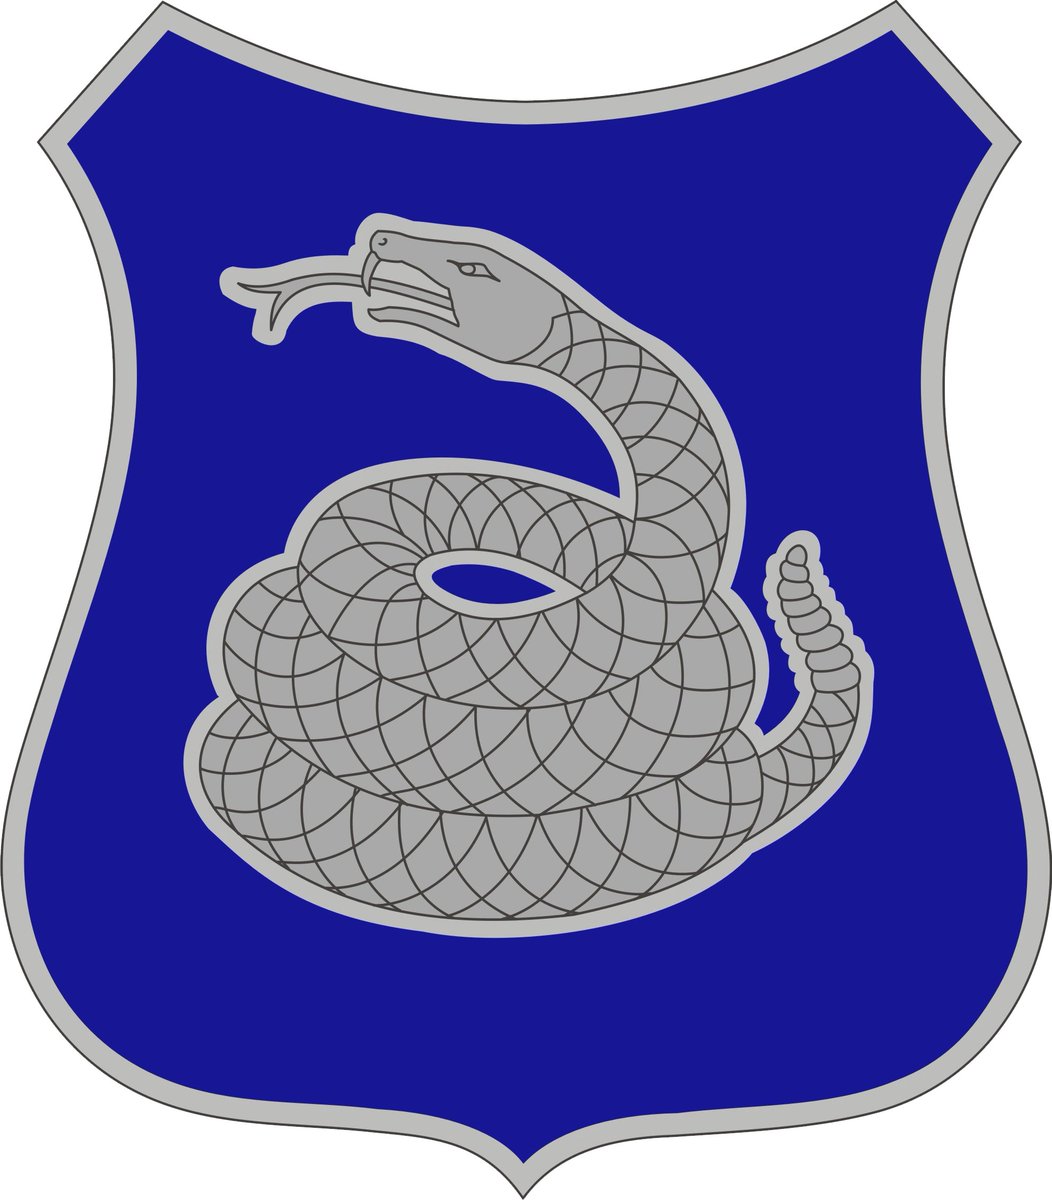 Here is the 369th Infantry Regiment, formerly known as the 15th New York National Guard Regiment, & more commonly referred to as the Harlem Hellfighters. They consisted primarily of black troops that fought in World War I.Their motto was "Don't Tread On Me, God Damn, Let's Go."